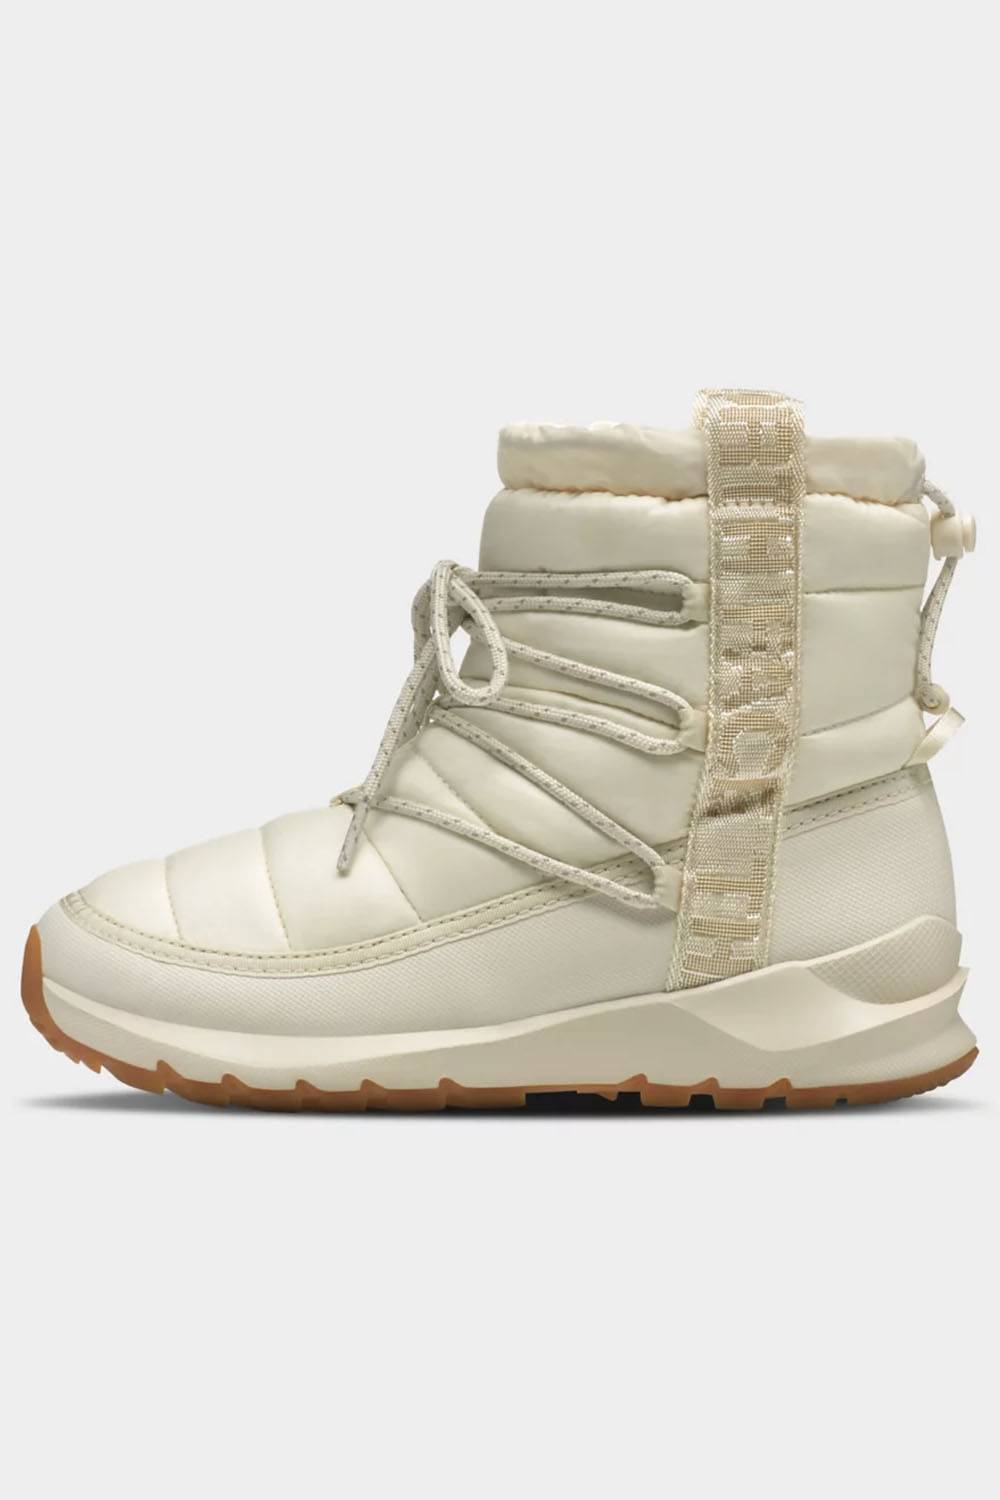 north face vegan hiking boots